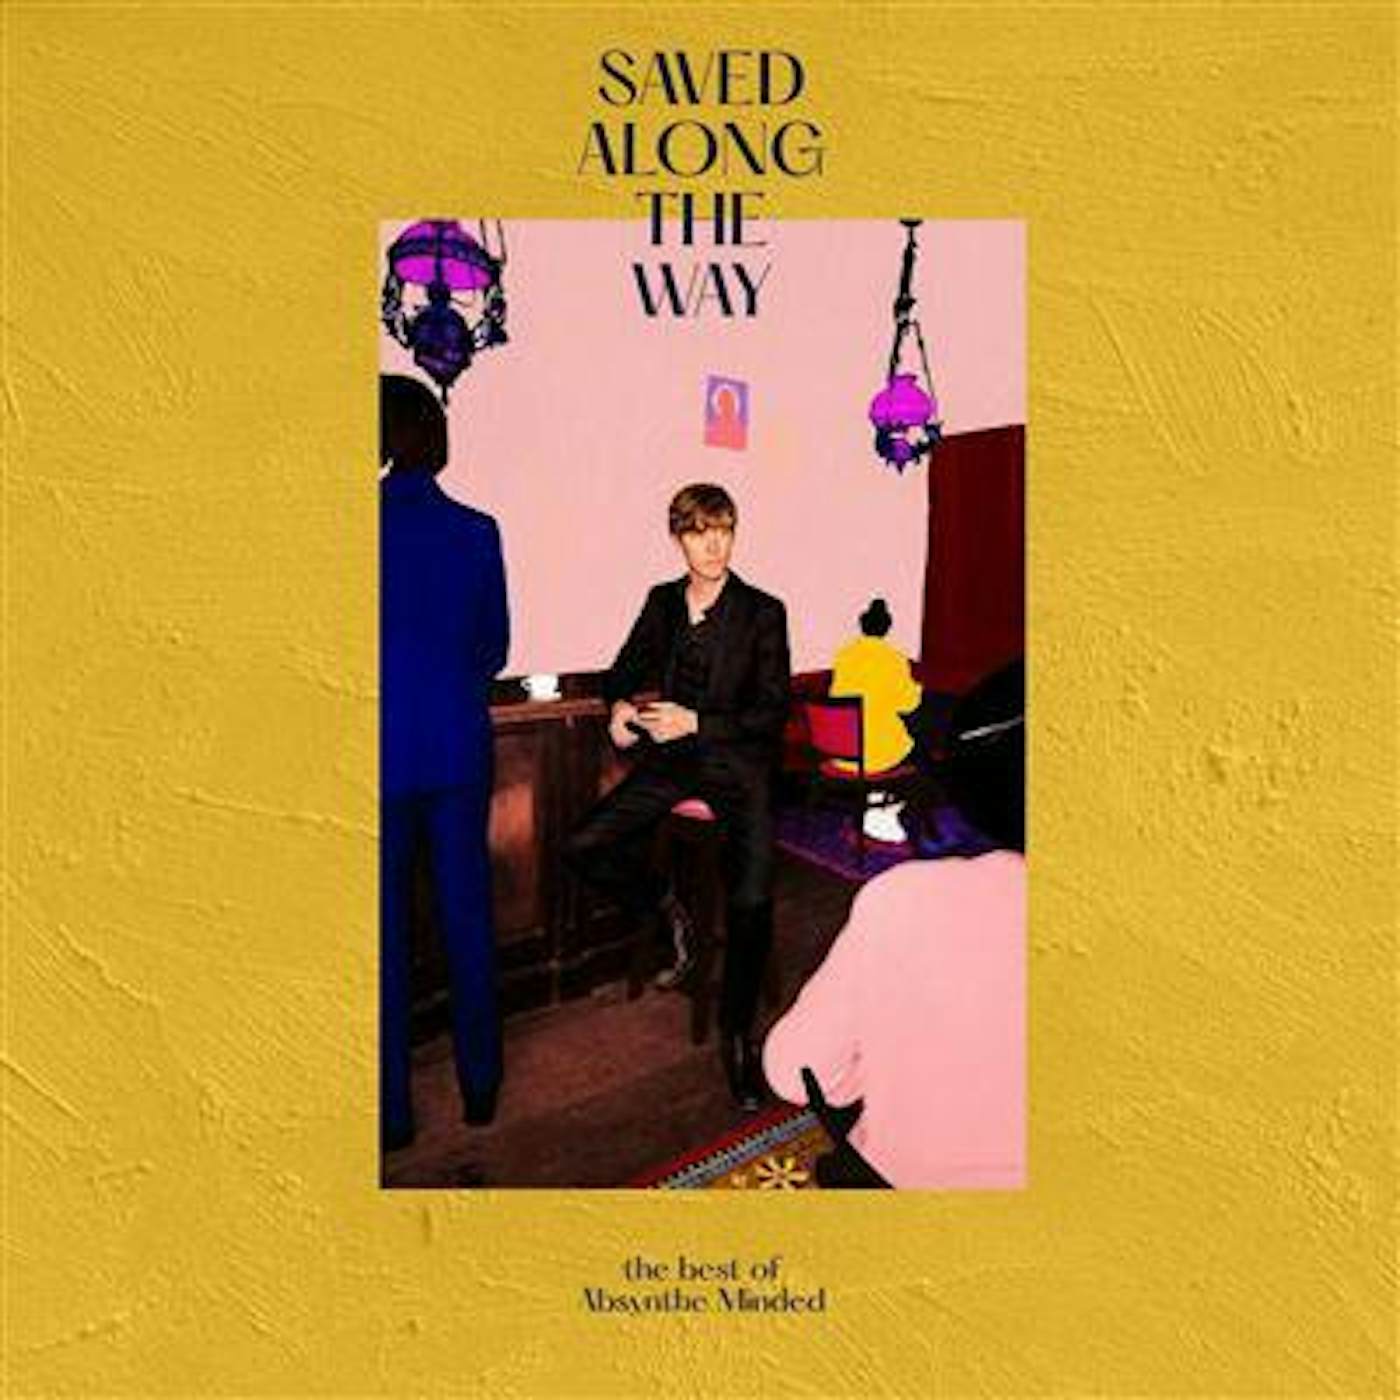 Absynthe Minded SAVED ALONG THE WAY: THE BEST OF CD